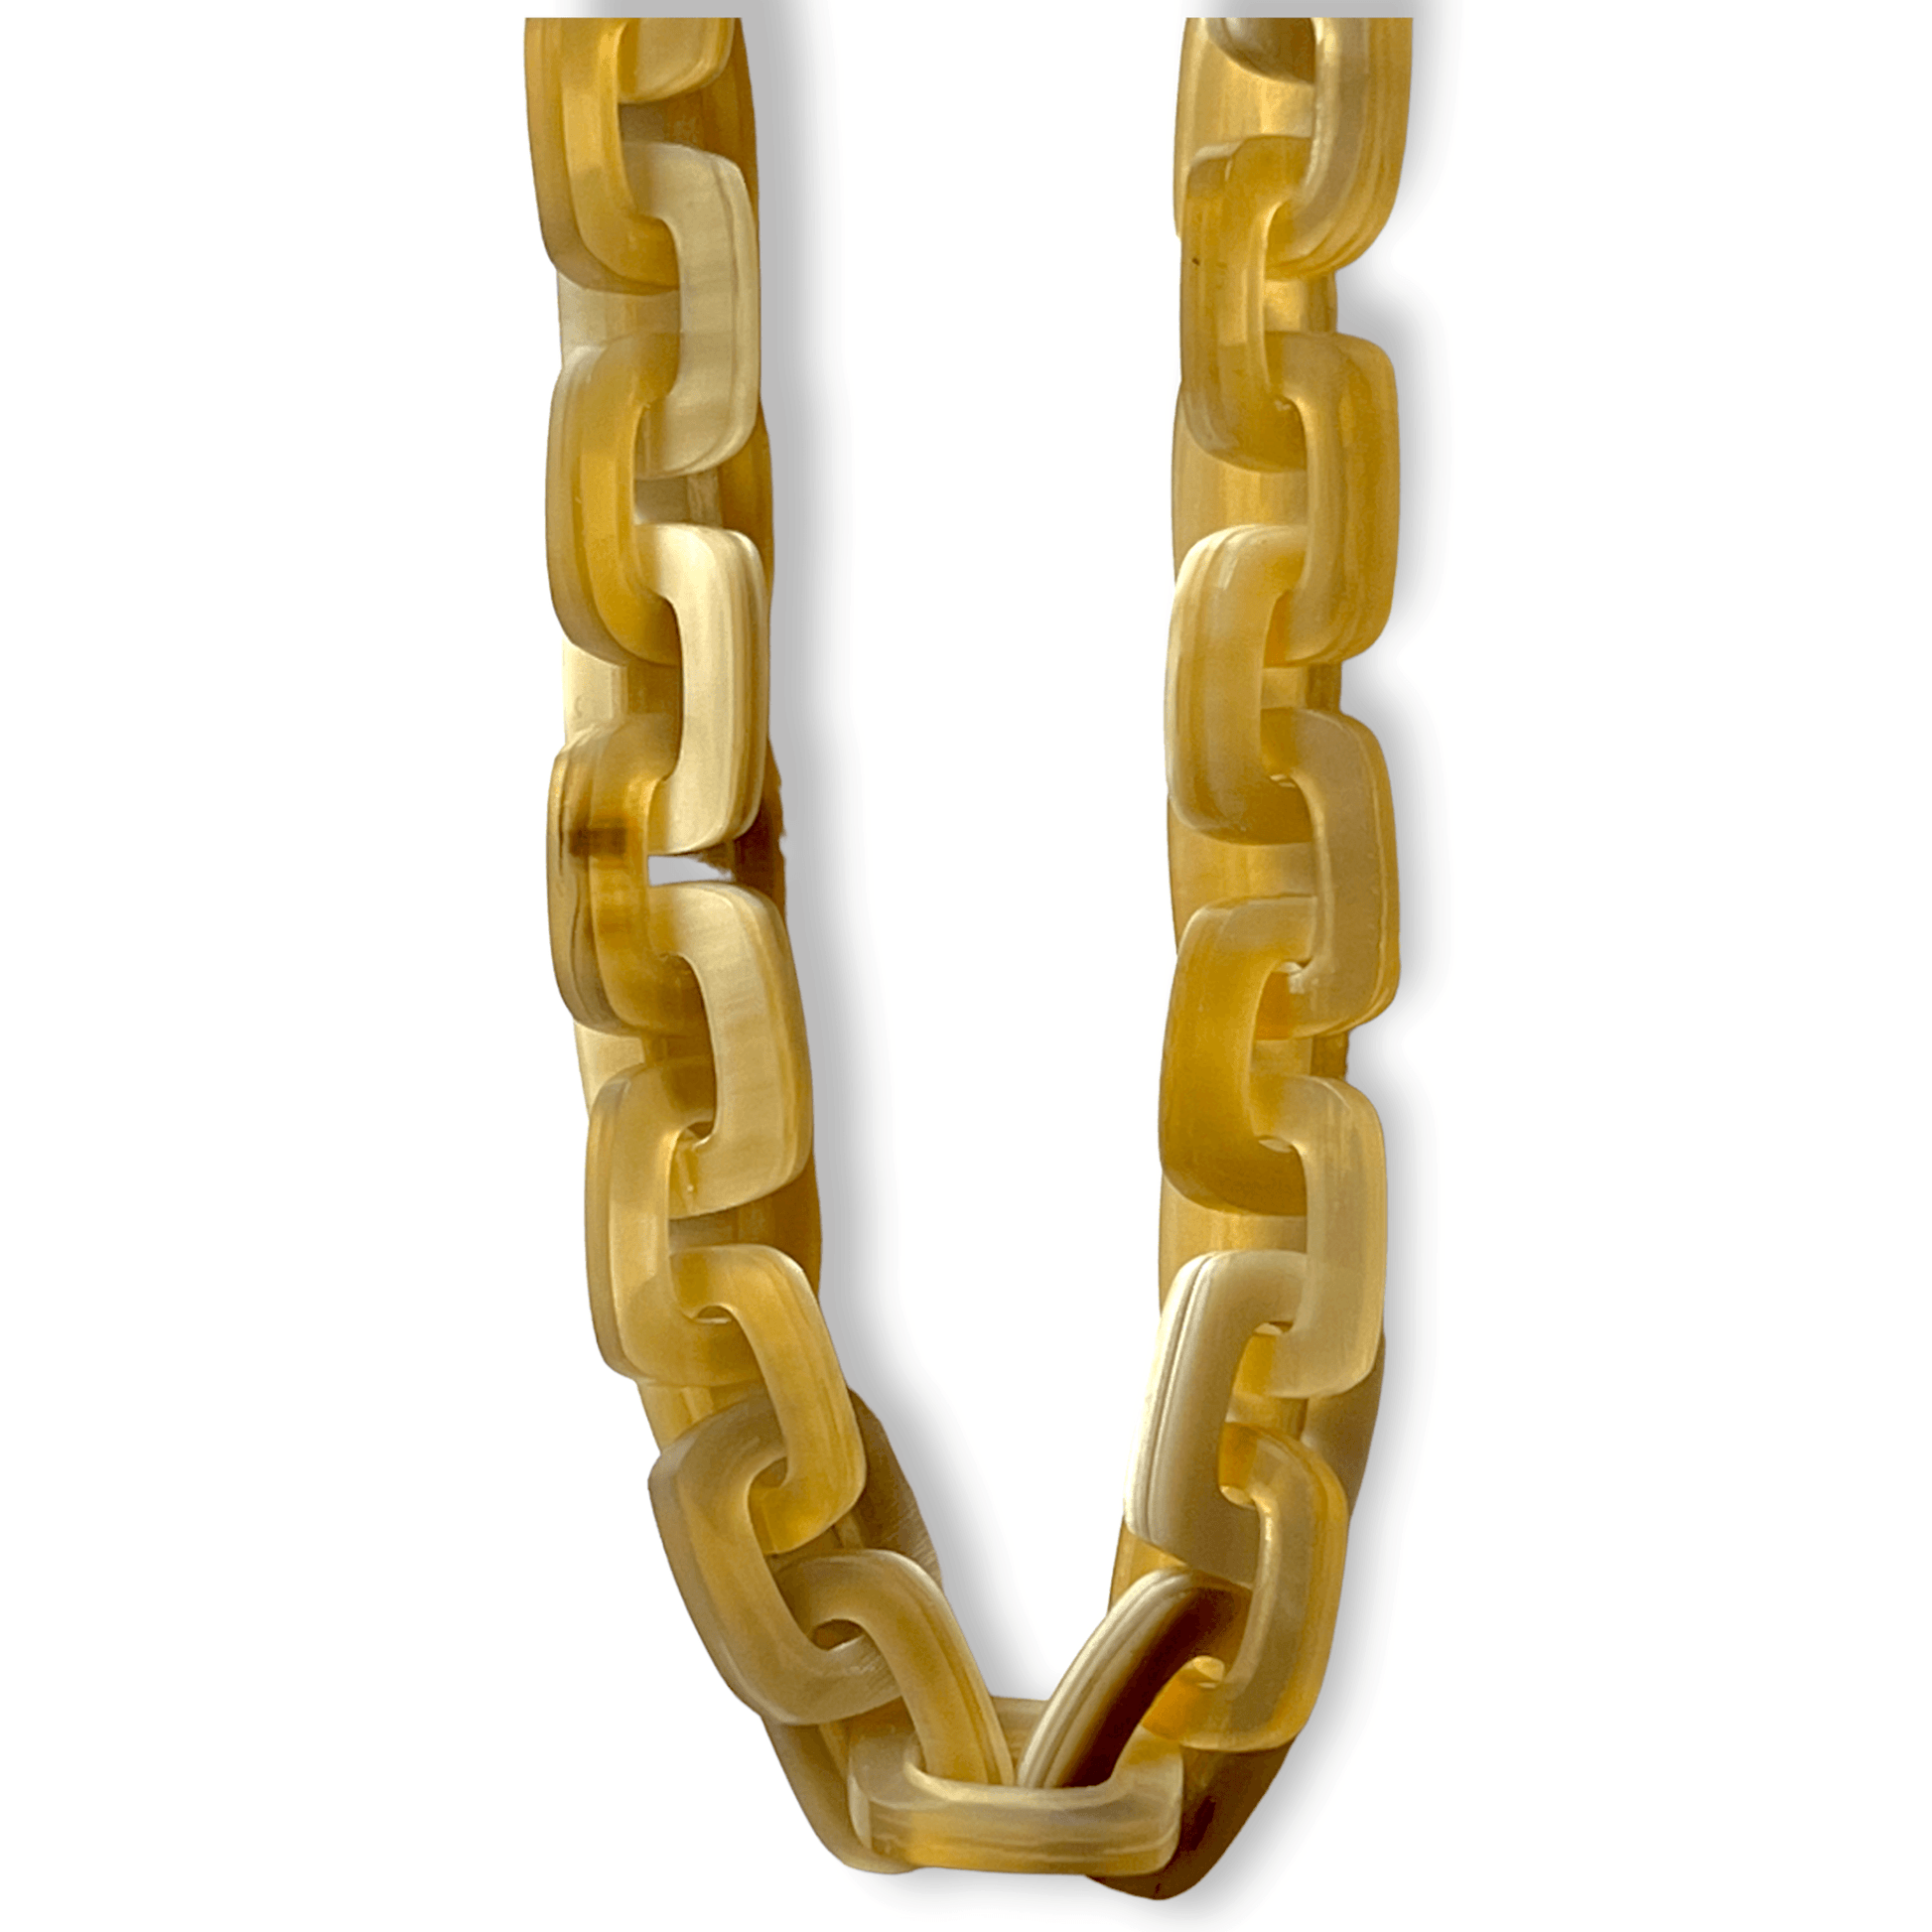 Chainlink horn necklace with stubby square linksSundara Joon